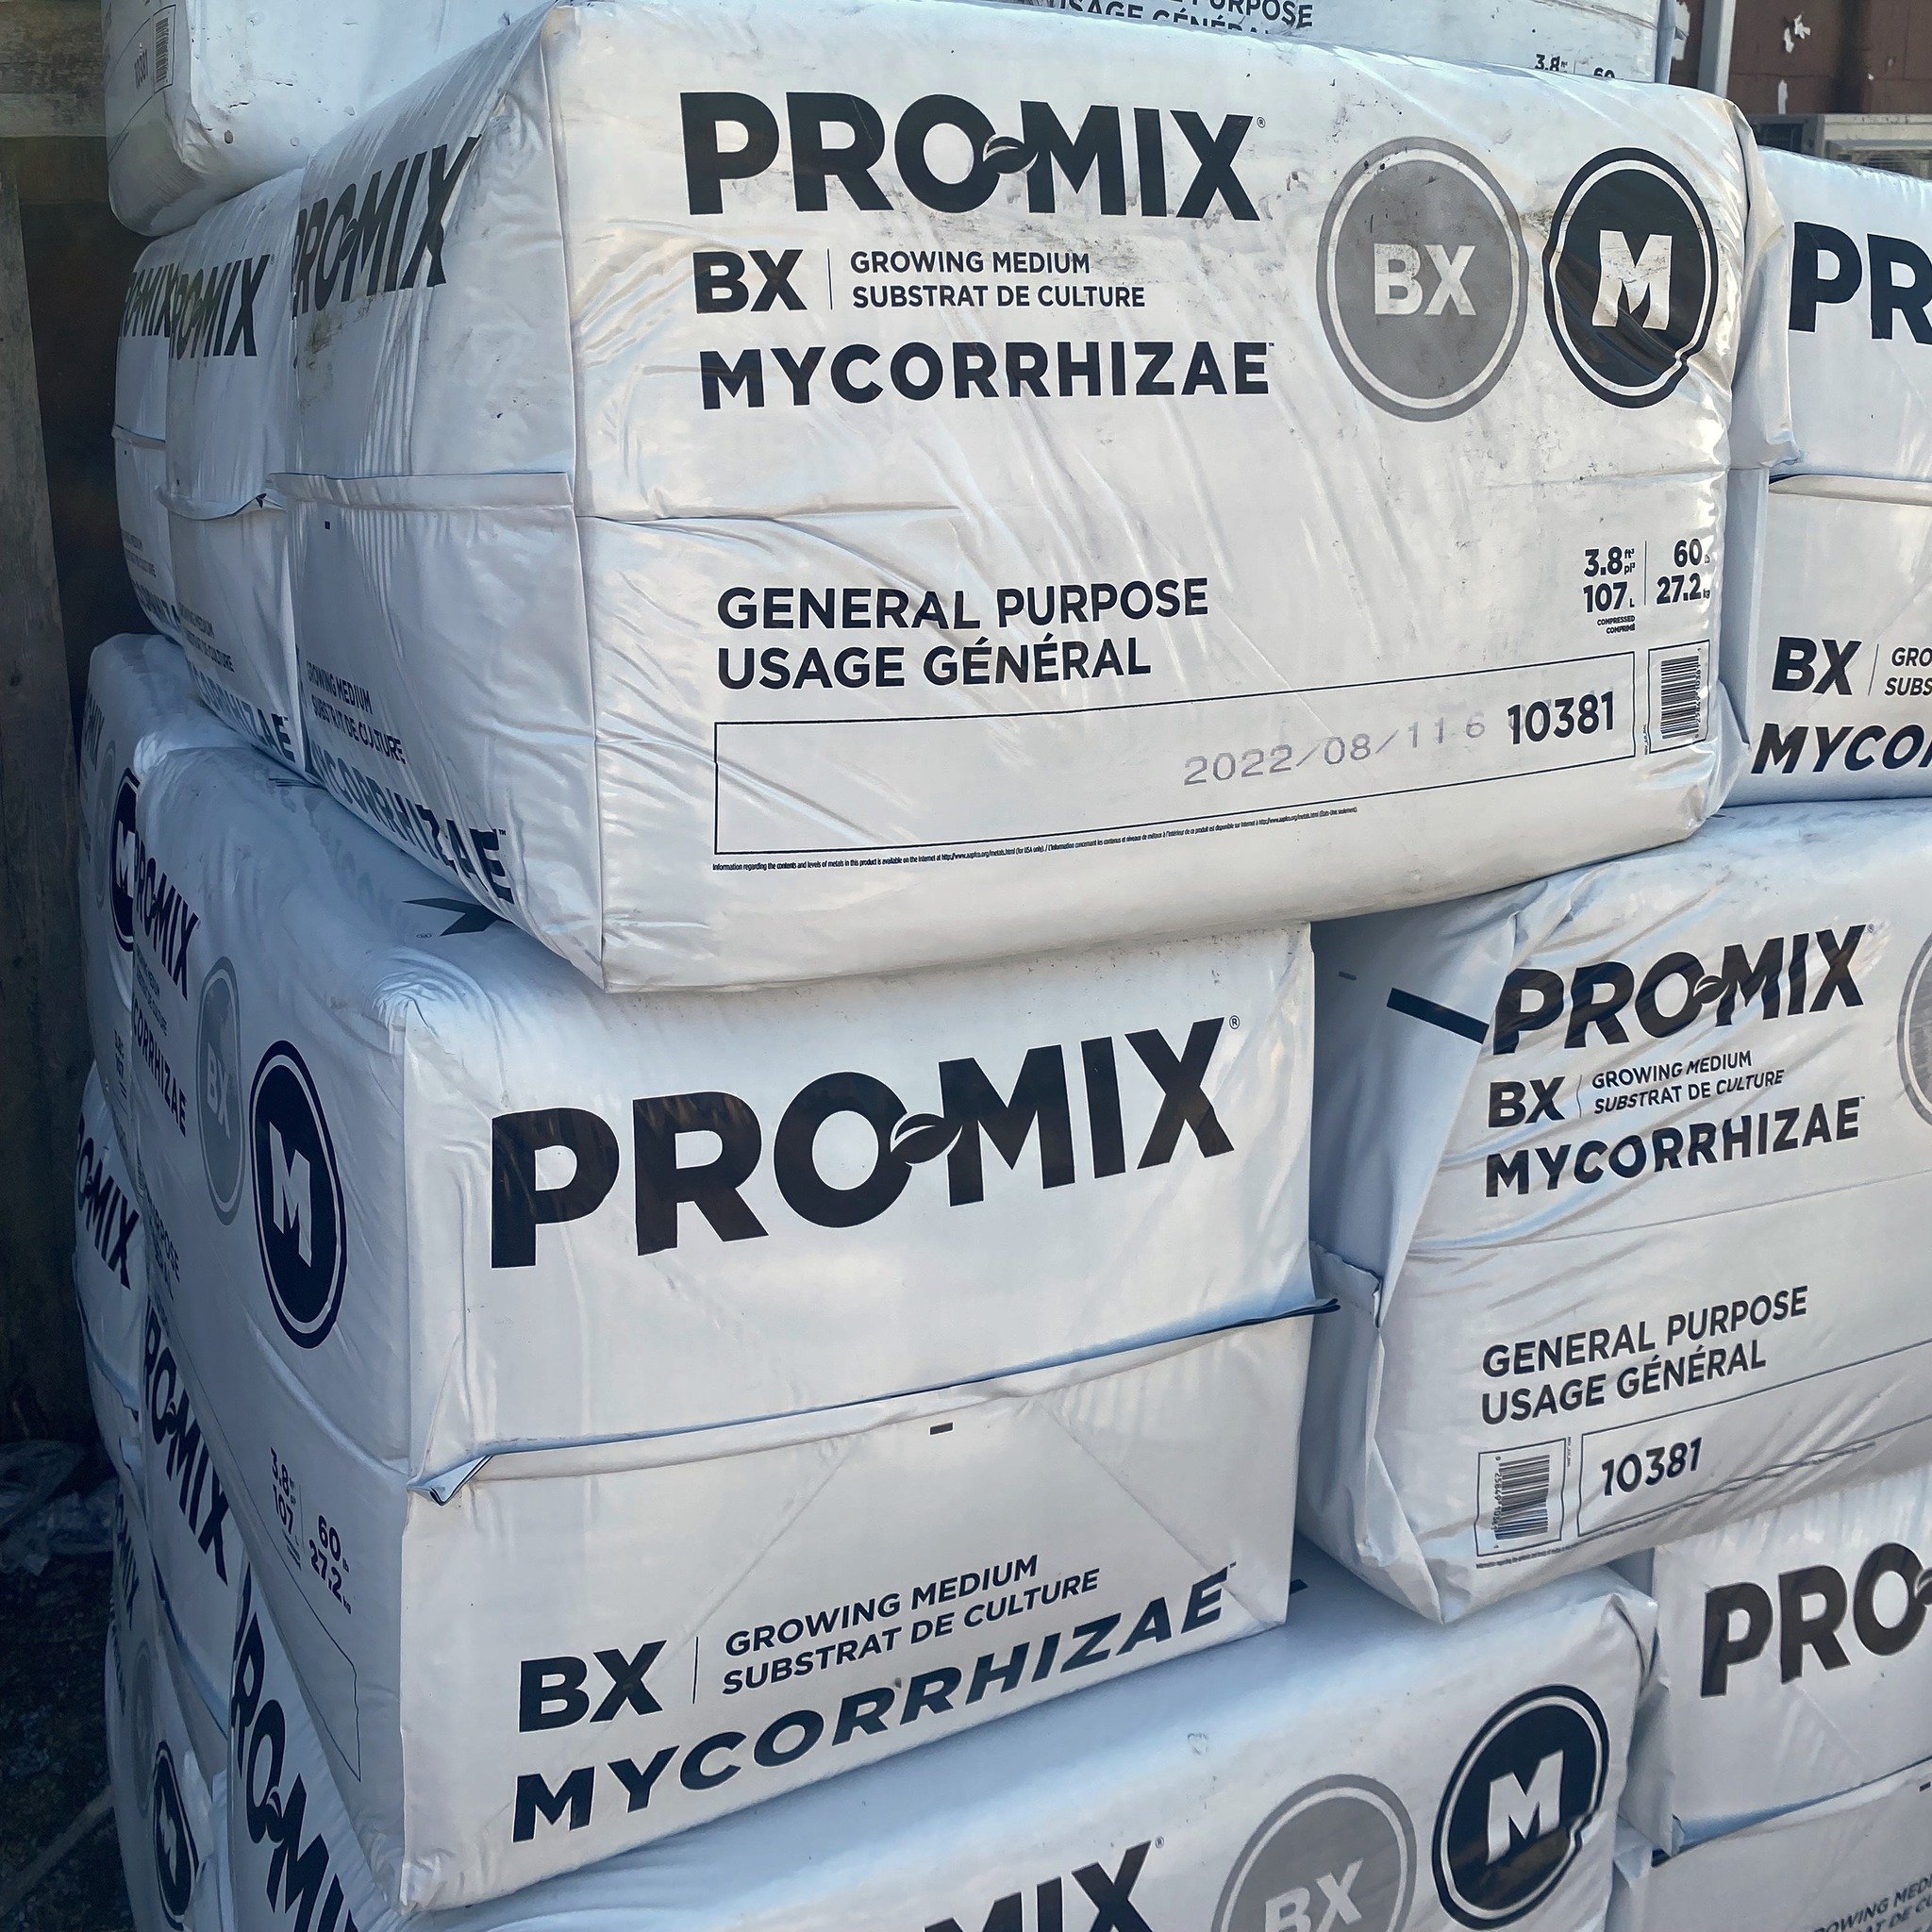 Hello #MycorrhizaeMonday
Unlock the full potential of your plants with Pro-Mix Mycorrhizae! 🌿✨ Enriched with beneficial mycorrhizal fungi, this premium growing medium promotes stronger root development, enhanced nutrient uptake, and improved plant r